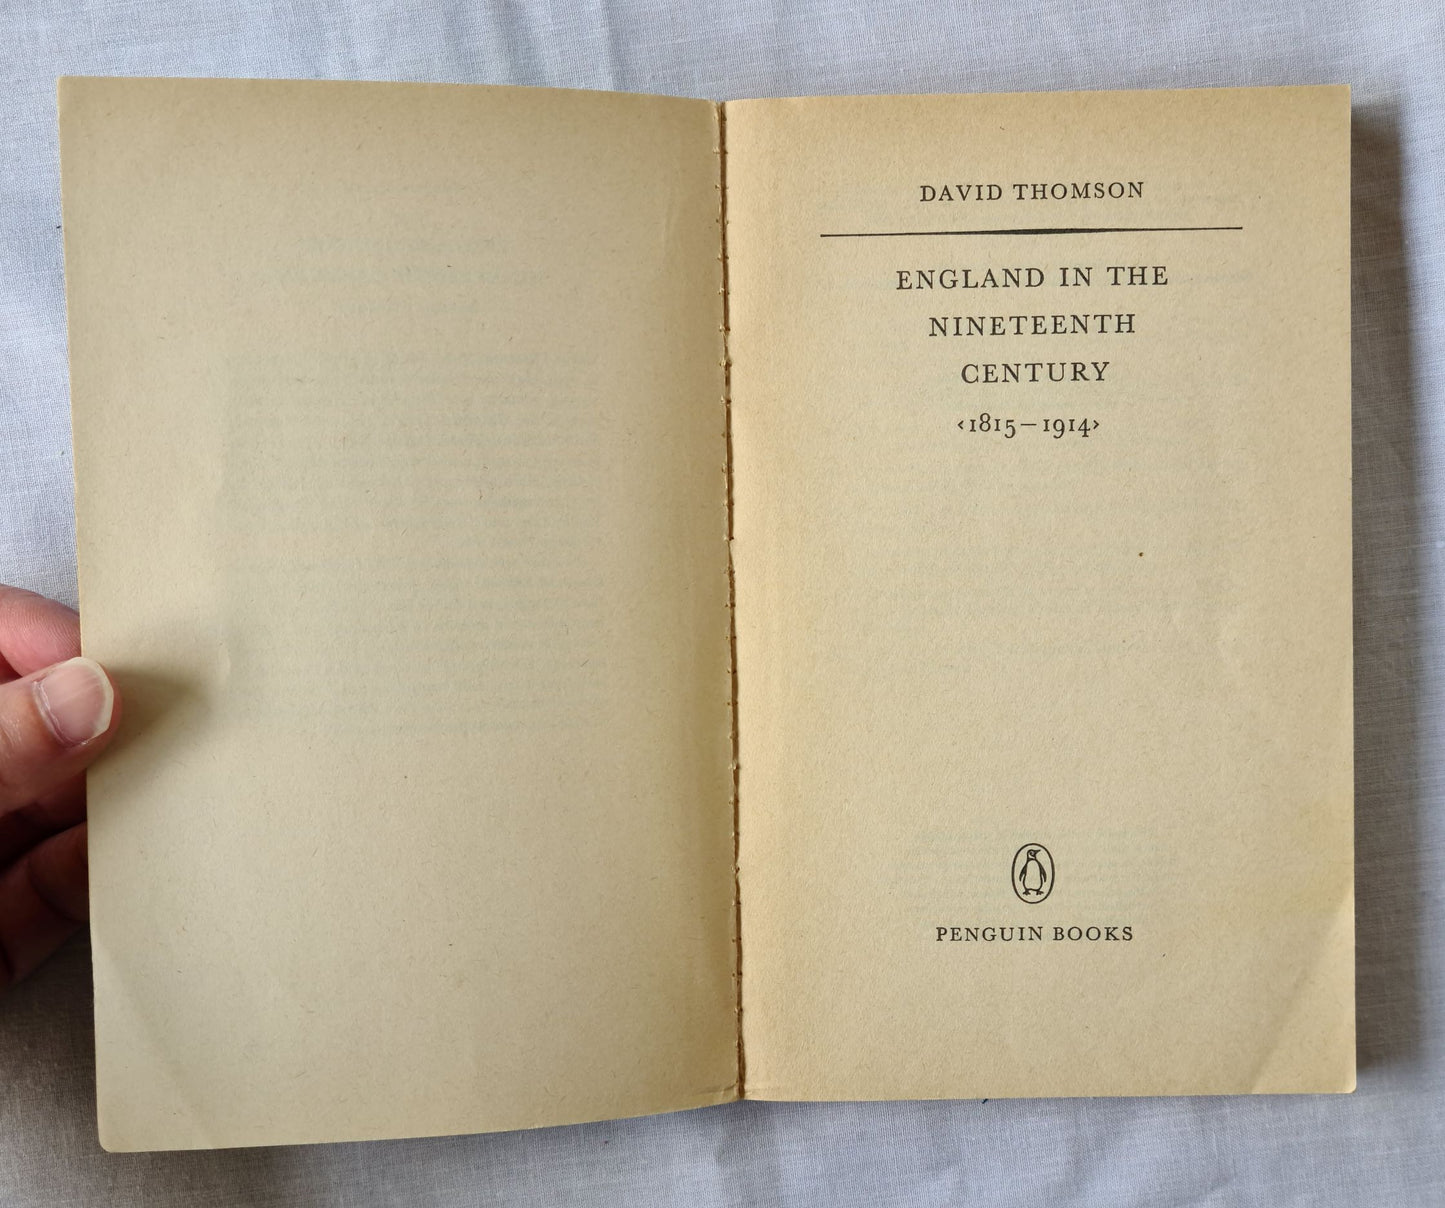 England in the Nineteenth Century by David Thomson